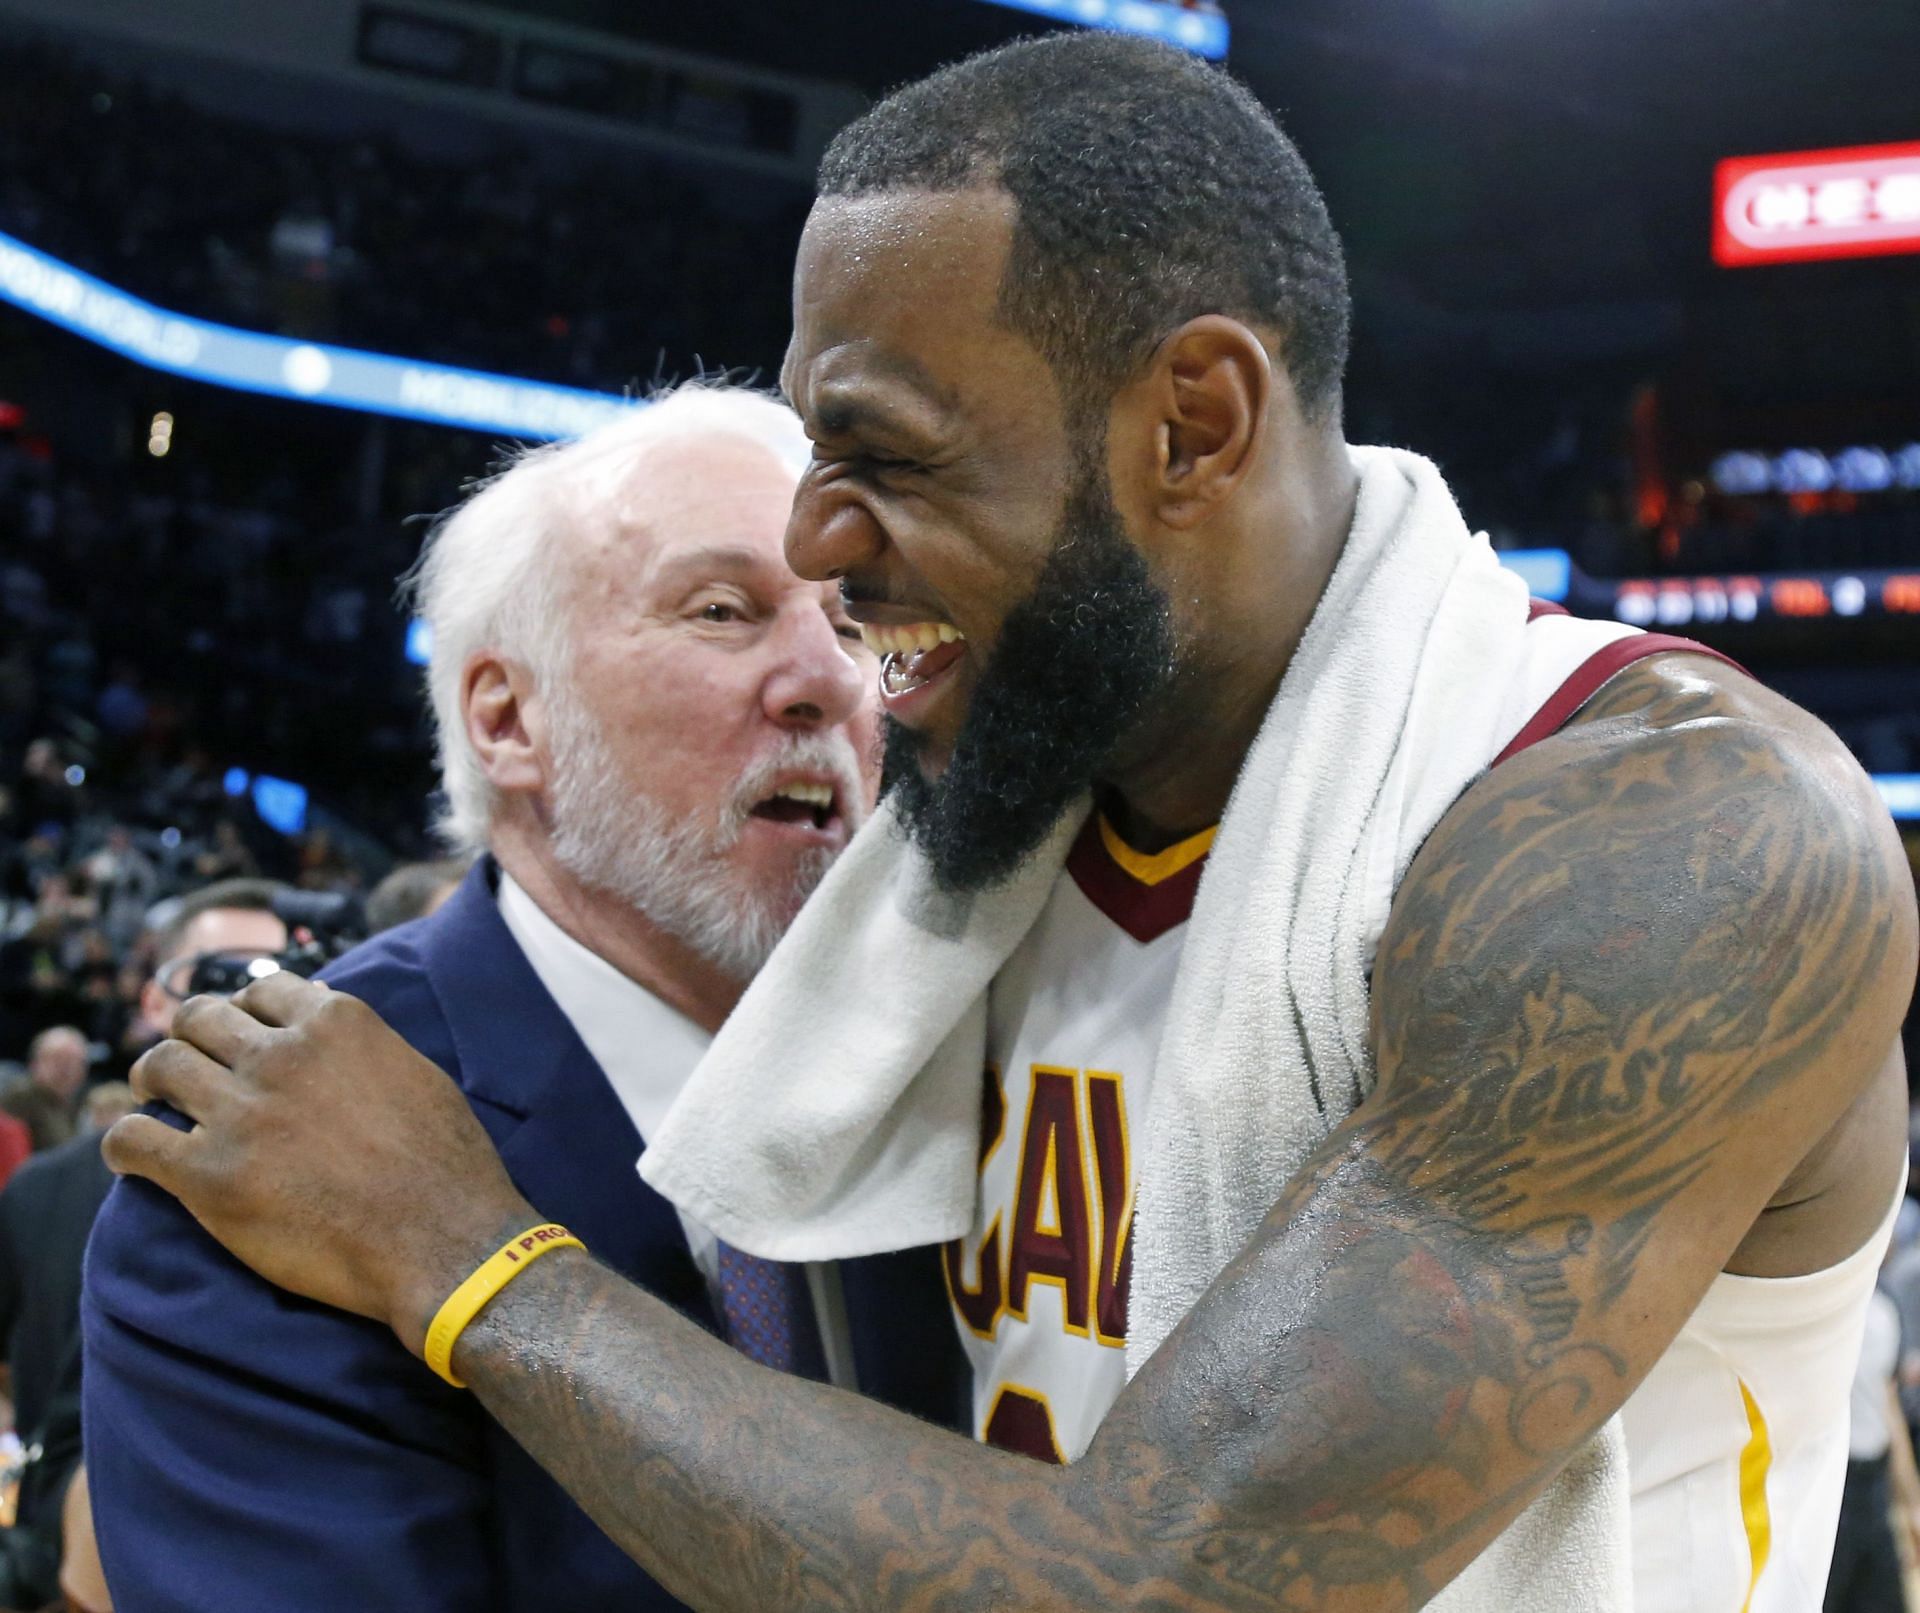 LeBron James with the Cleveland Cavaliers in 2018 with San Antonio Spurs coach Gregg Popovich